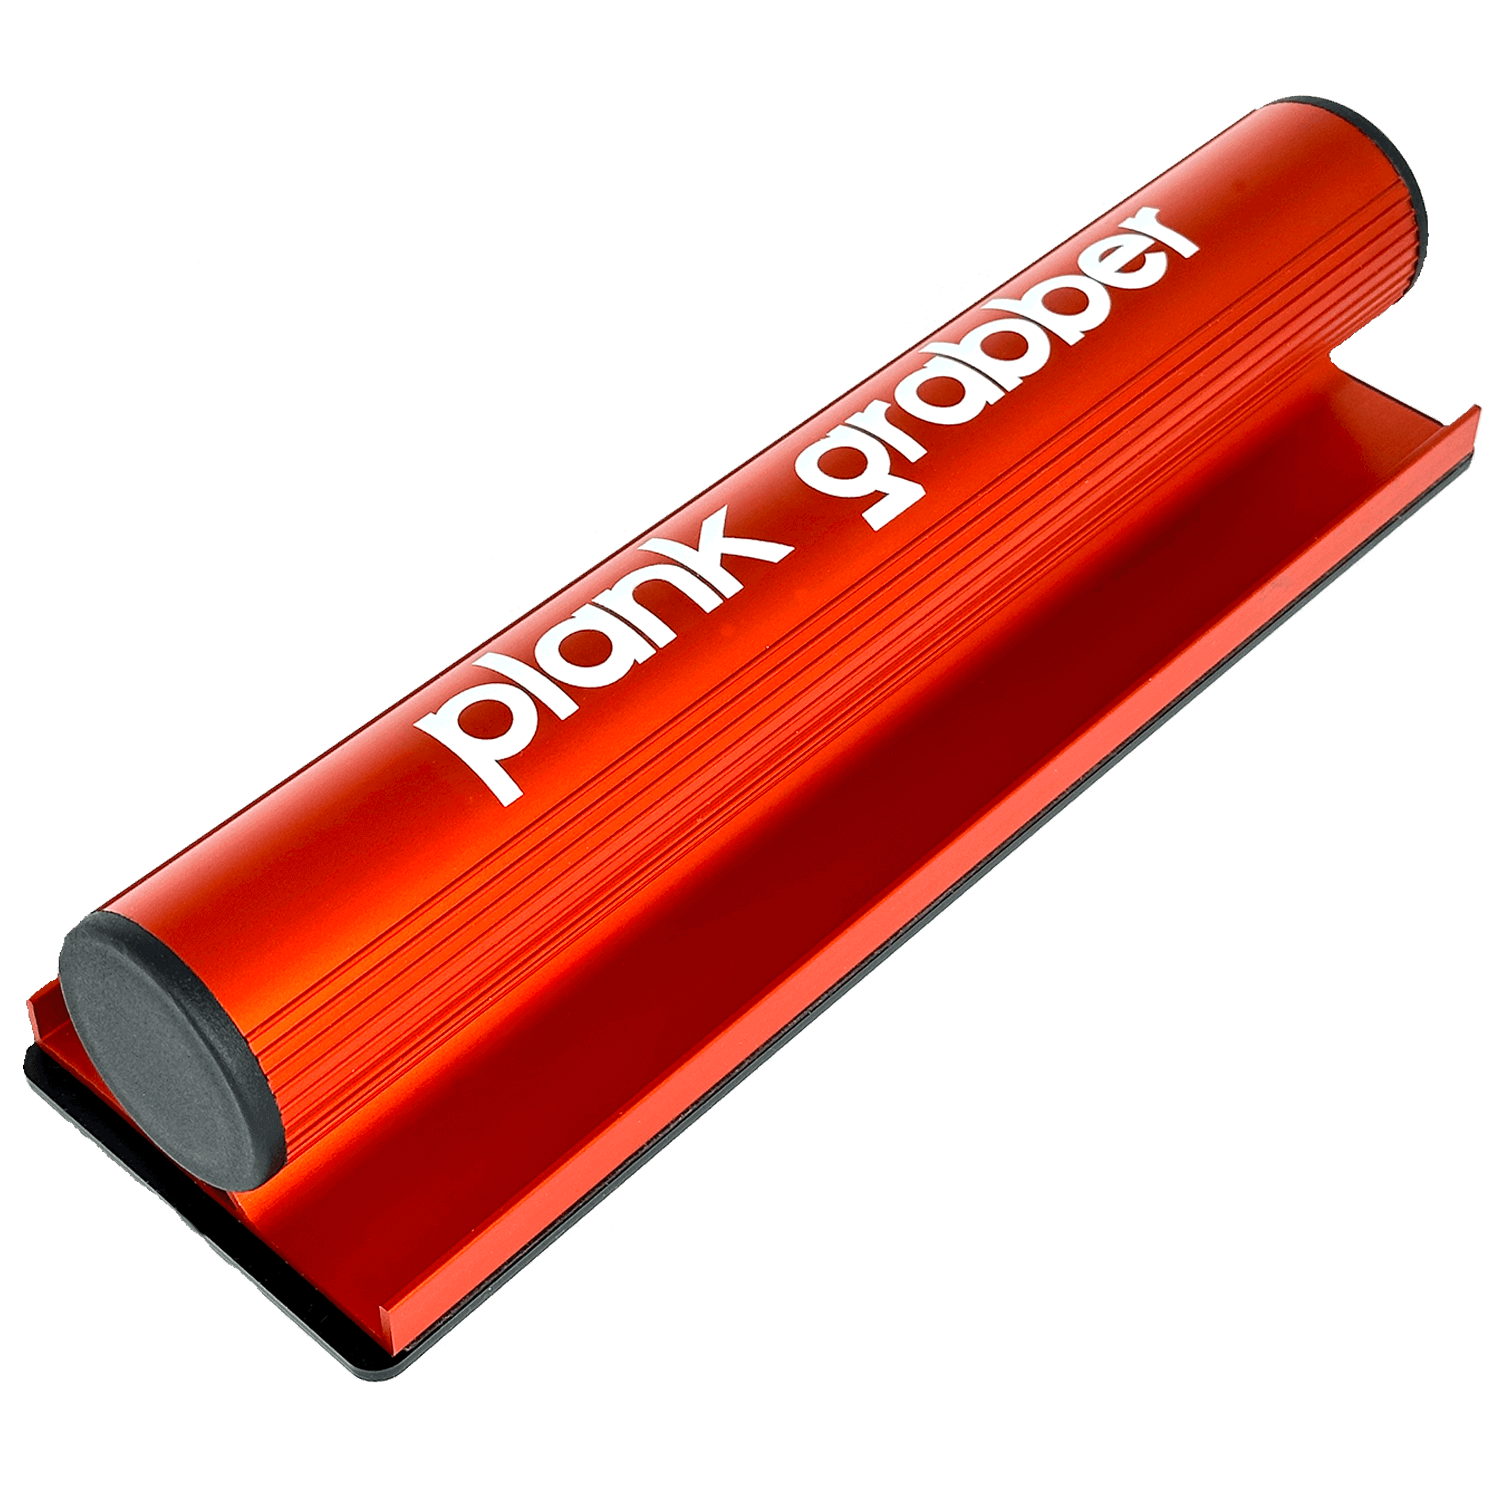 Floor Fix Pro Plank Grabber (AVAILABLE FROM JULY 22nd) Plank Grabber is a tool for fixing gaps in floating floors. It features a "Magic Grip Strip" that sticks to the plank you want to move like glue. Simply place Plan Grabber on the plank and give it a f